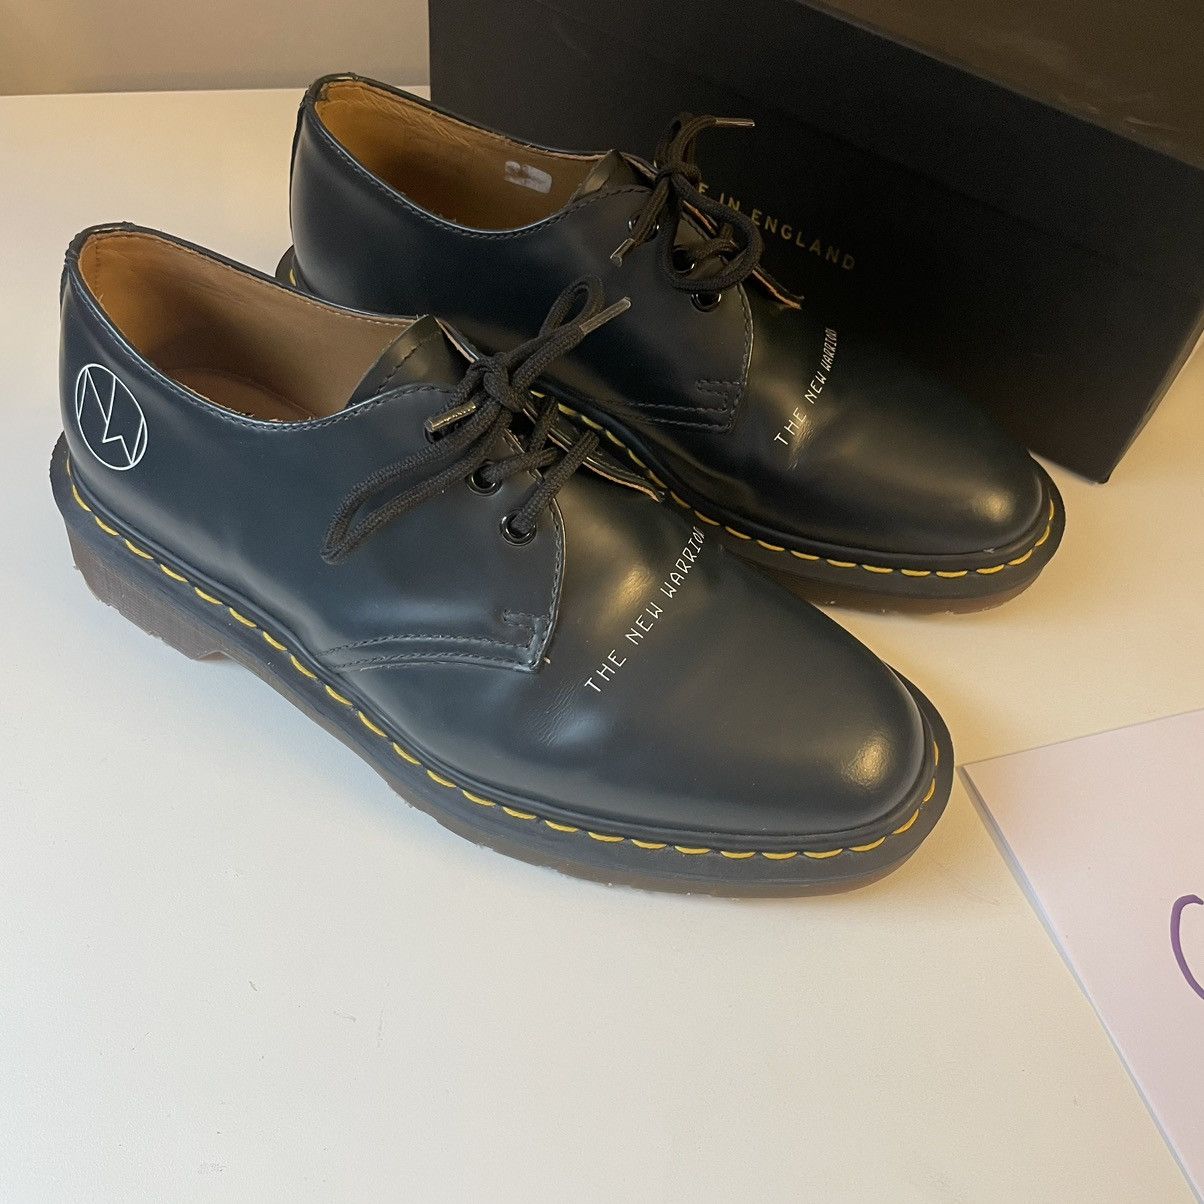 Undercover Undercover x Dr Martens 1461 Navy derby | Grailed